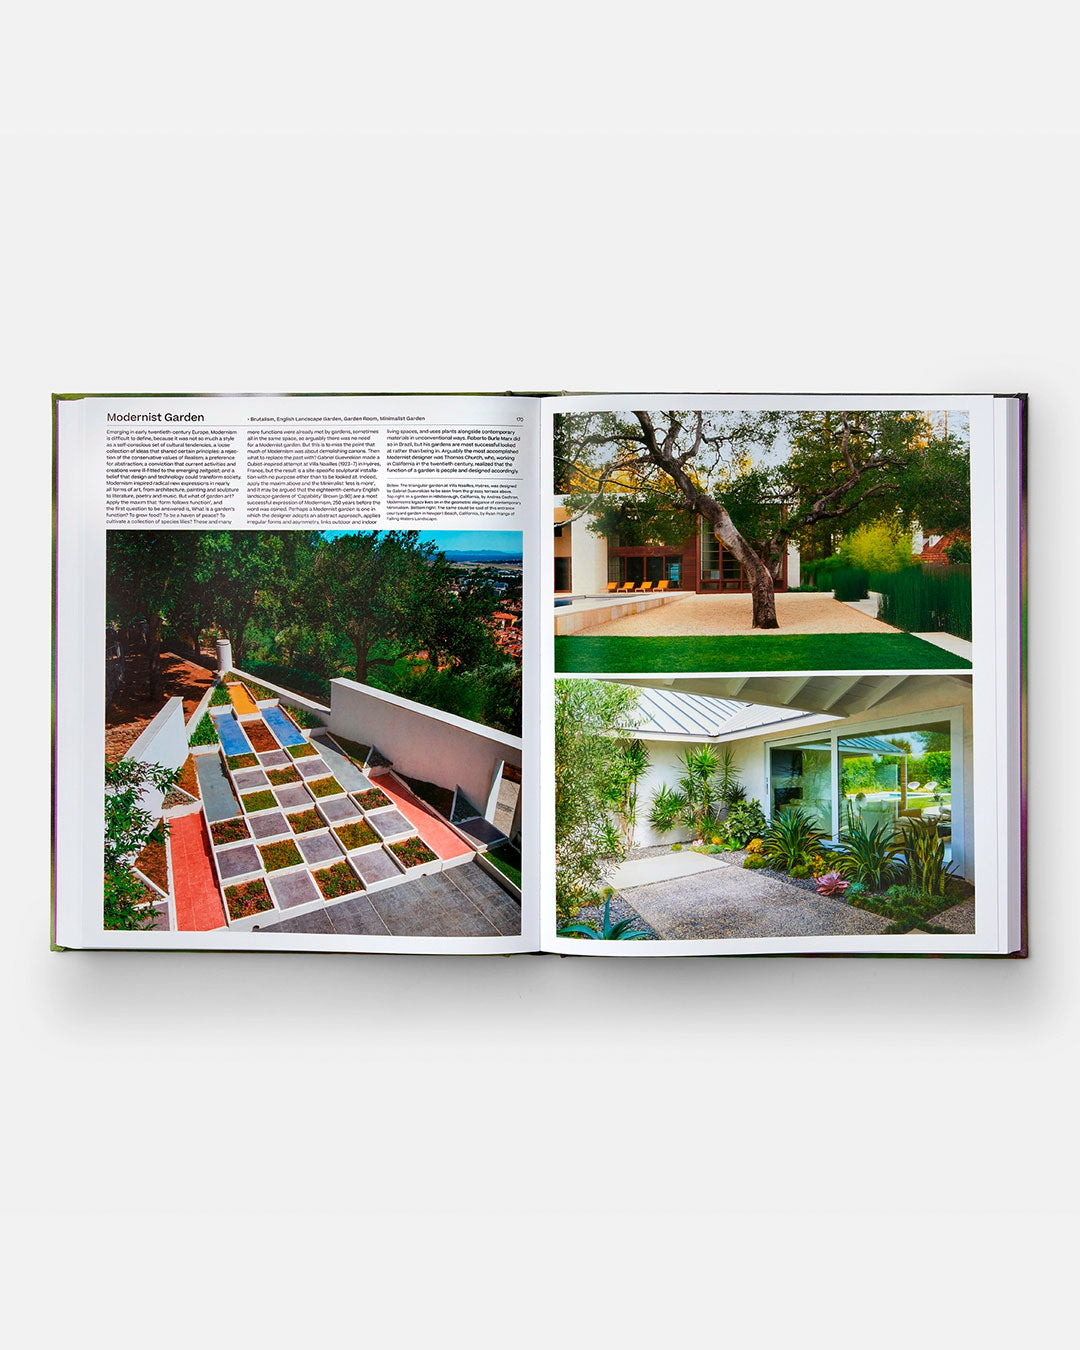 The Garden: Elements and Styles by Toby Musgrave